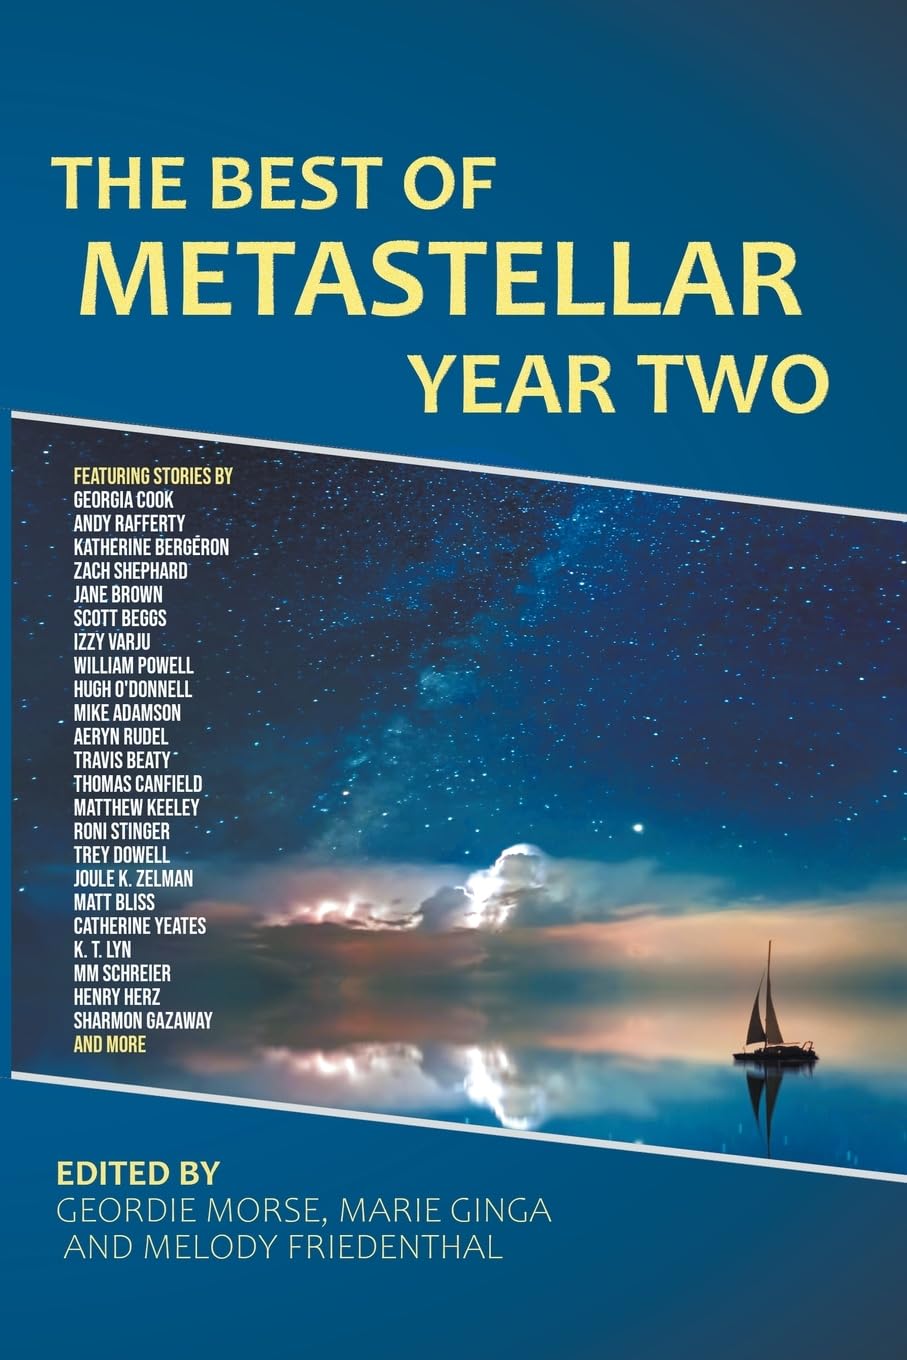 “The Old Red Schoolhouse in the Forest” chosen for anthology
“The Best of MetaStellar Year Two”